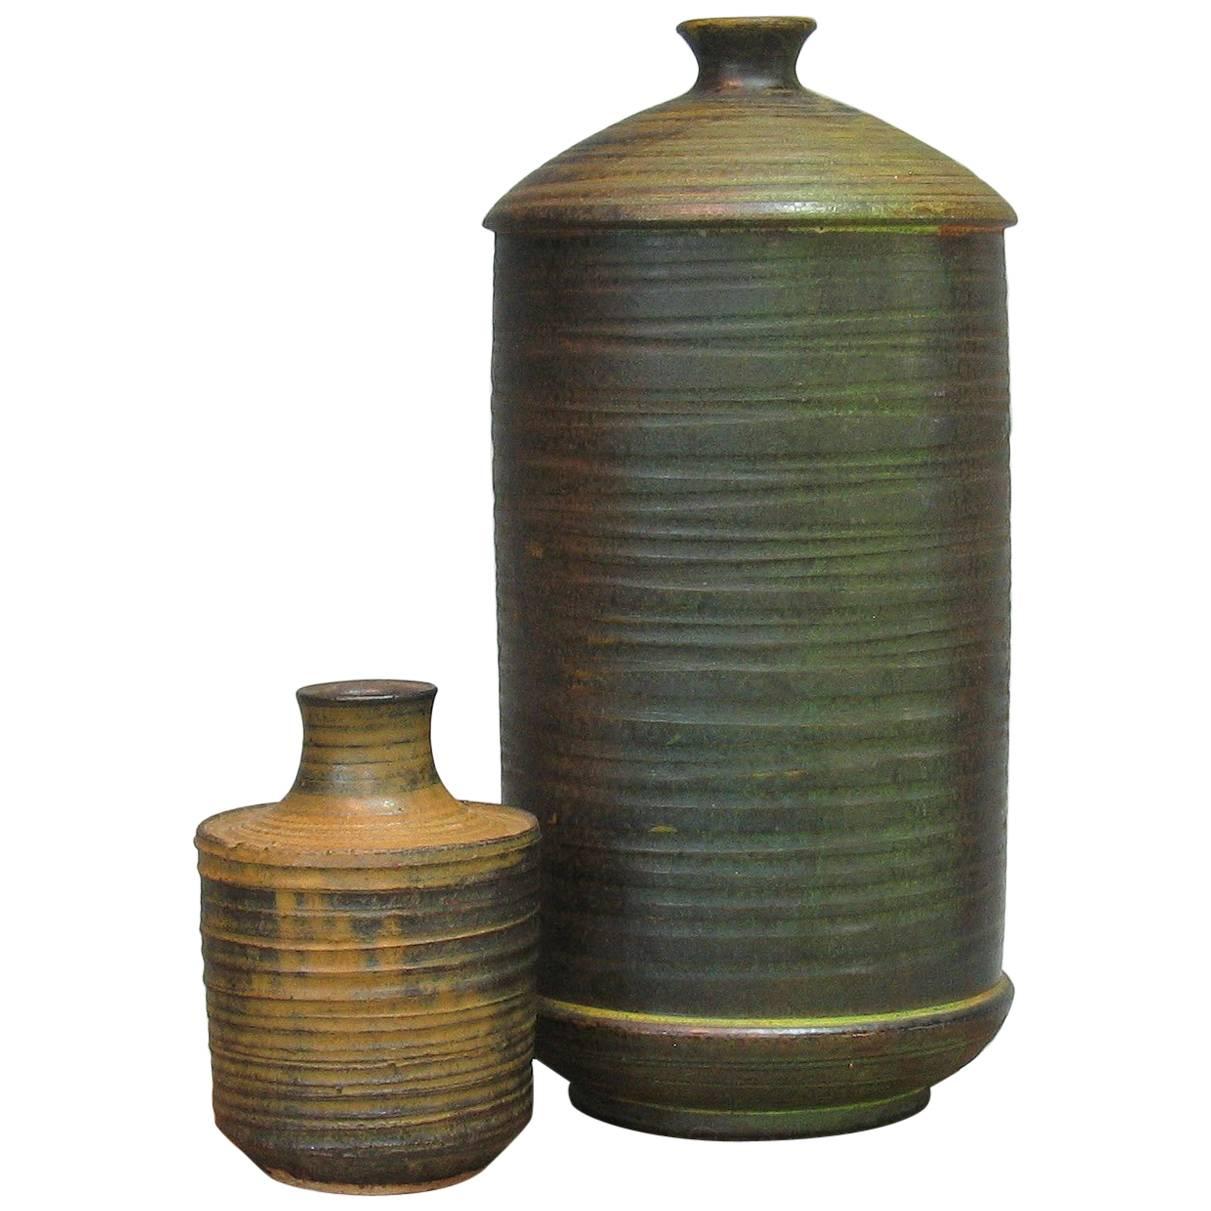 Complimentary Pair of Cylindrical Art Pottery Vases For Sale